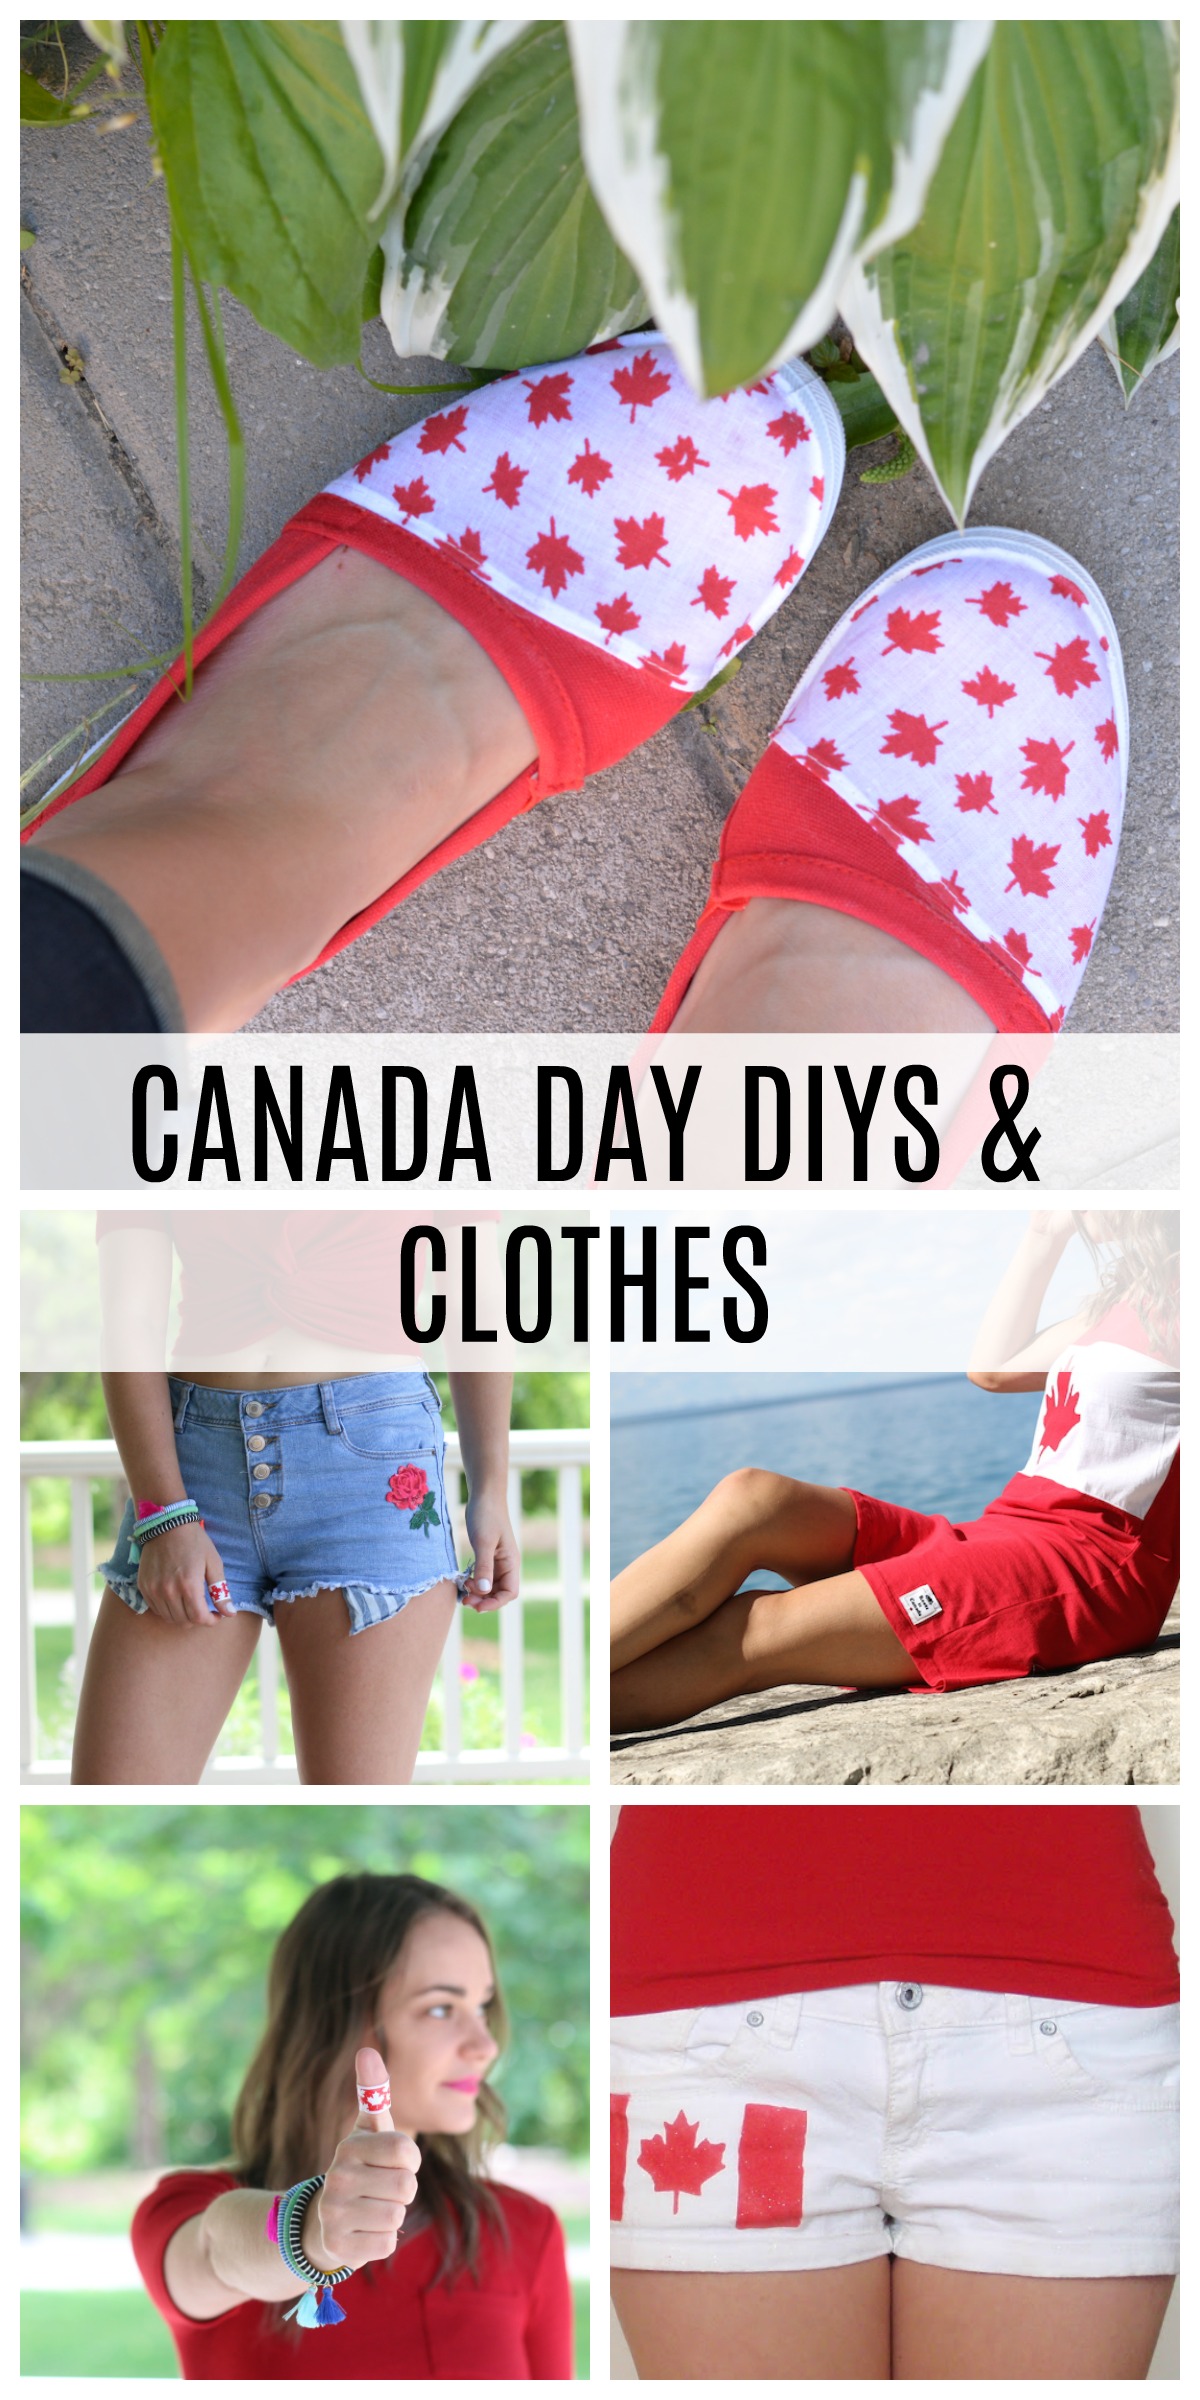 CANADA DAY OUTFIT AND DIY IDEAS